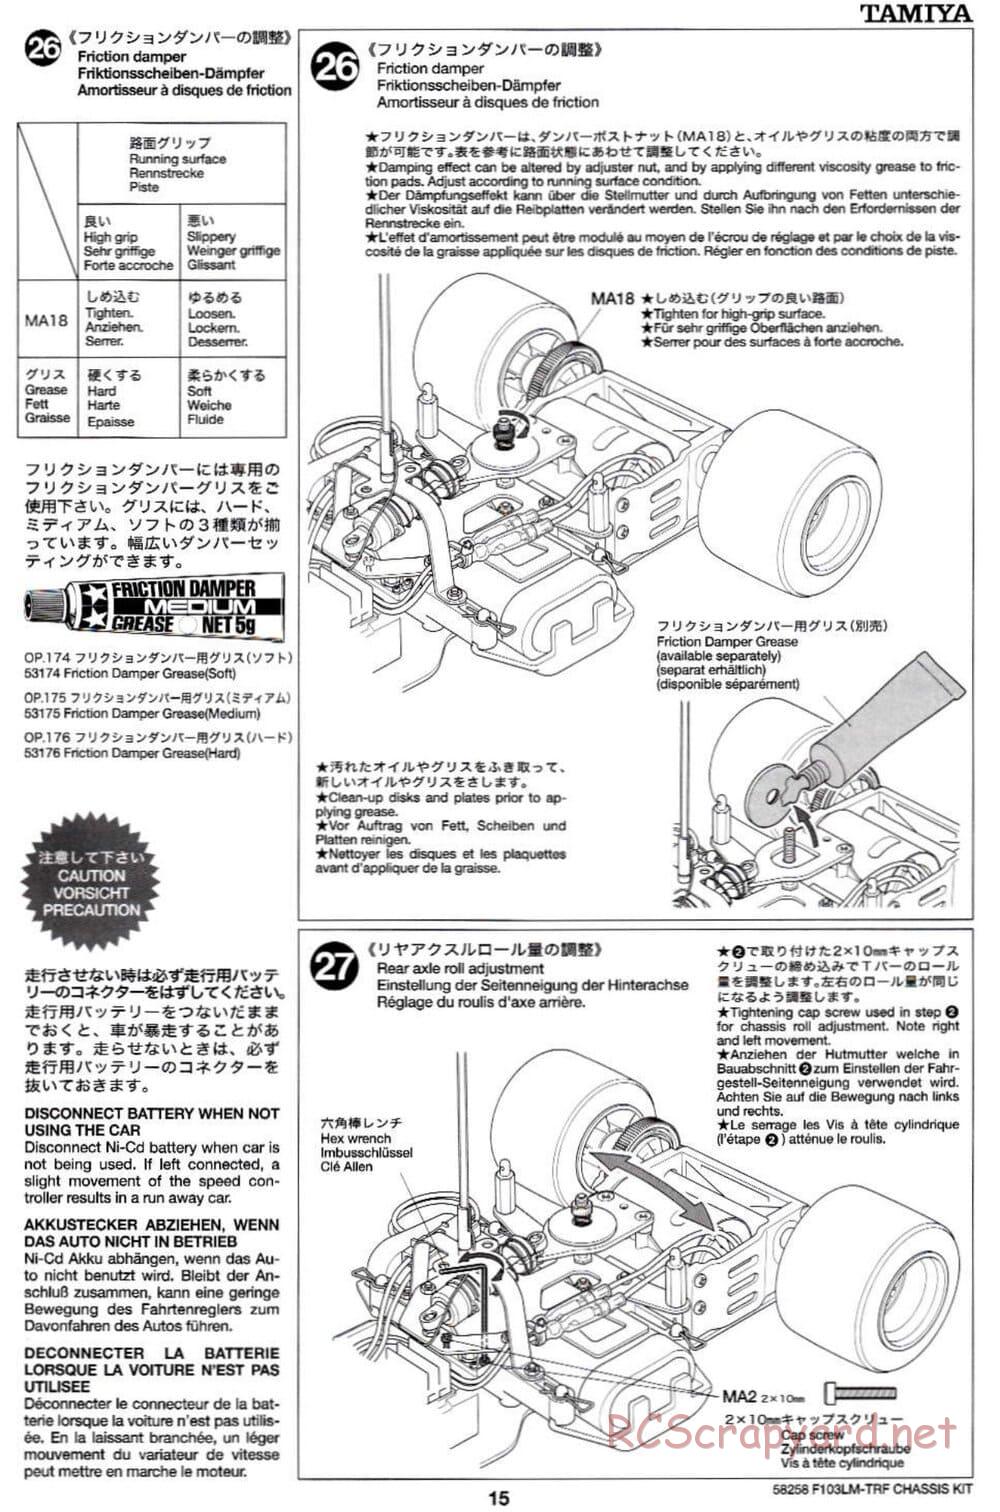 Tamiya - F103LM TRF Special Chassis - Manual - Page 15